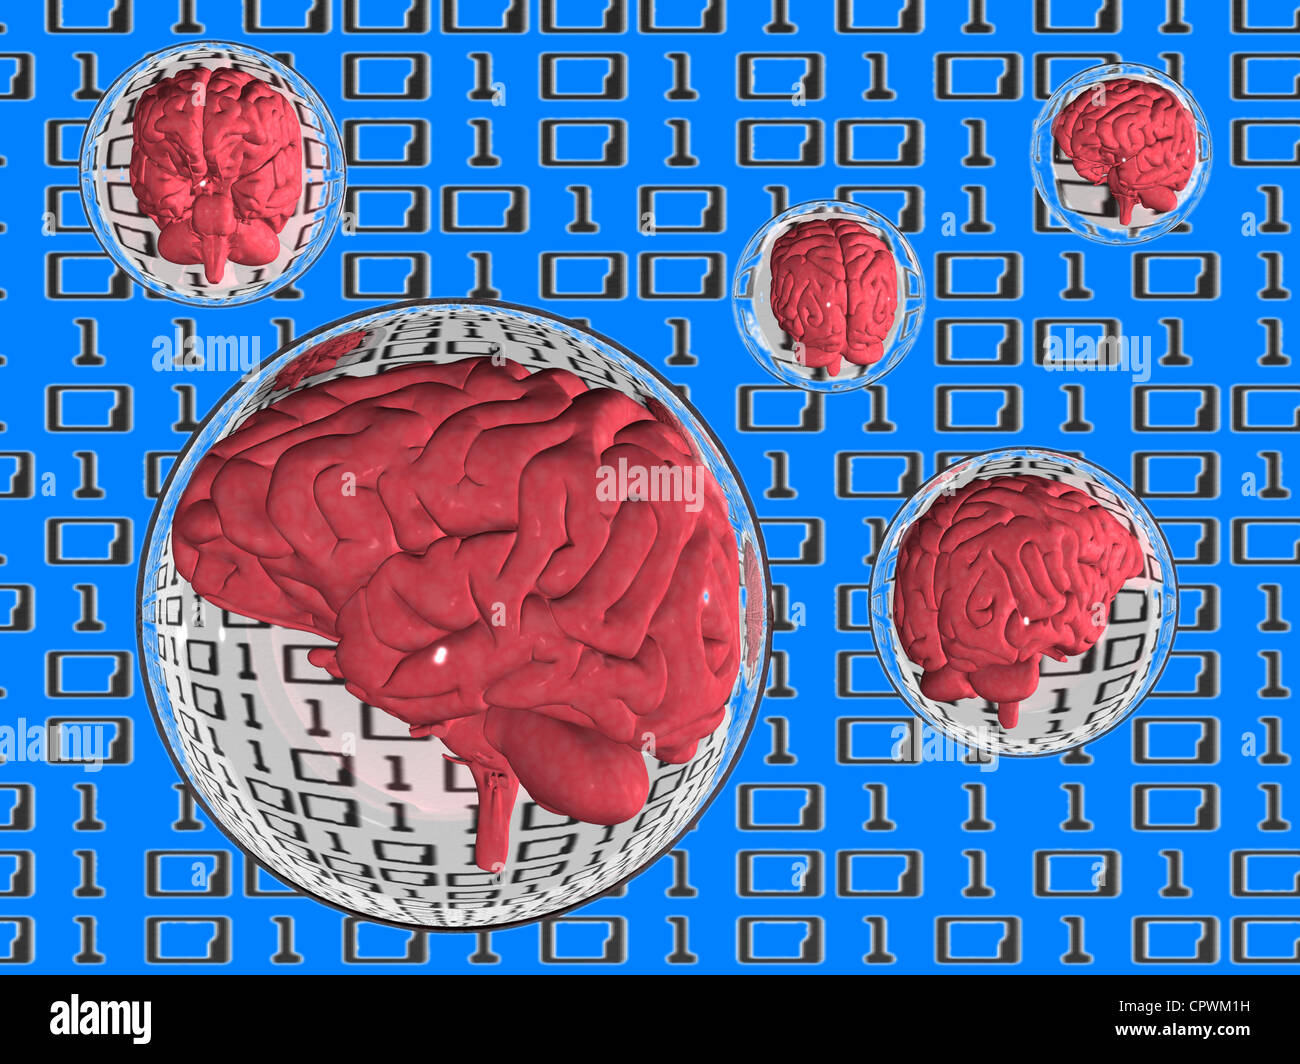 illustration of a human brain floating in spheres Stock Photo